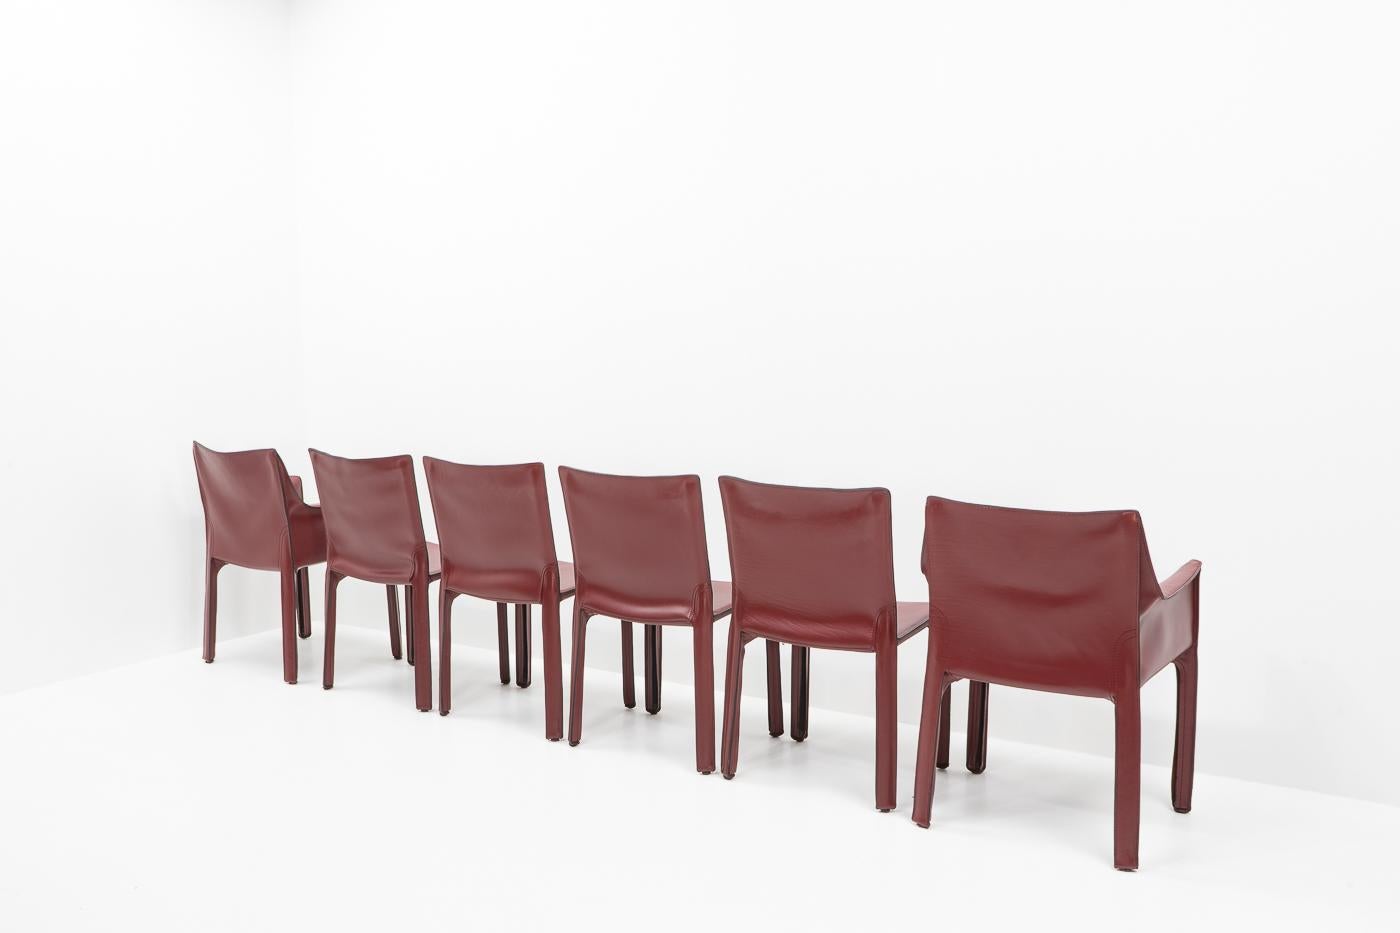 Italian Design Classics, Cab Chairs by Mario Bellini for Cassina, Set of 6 For Sale 1